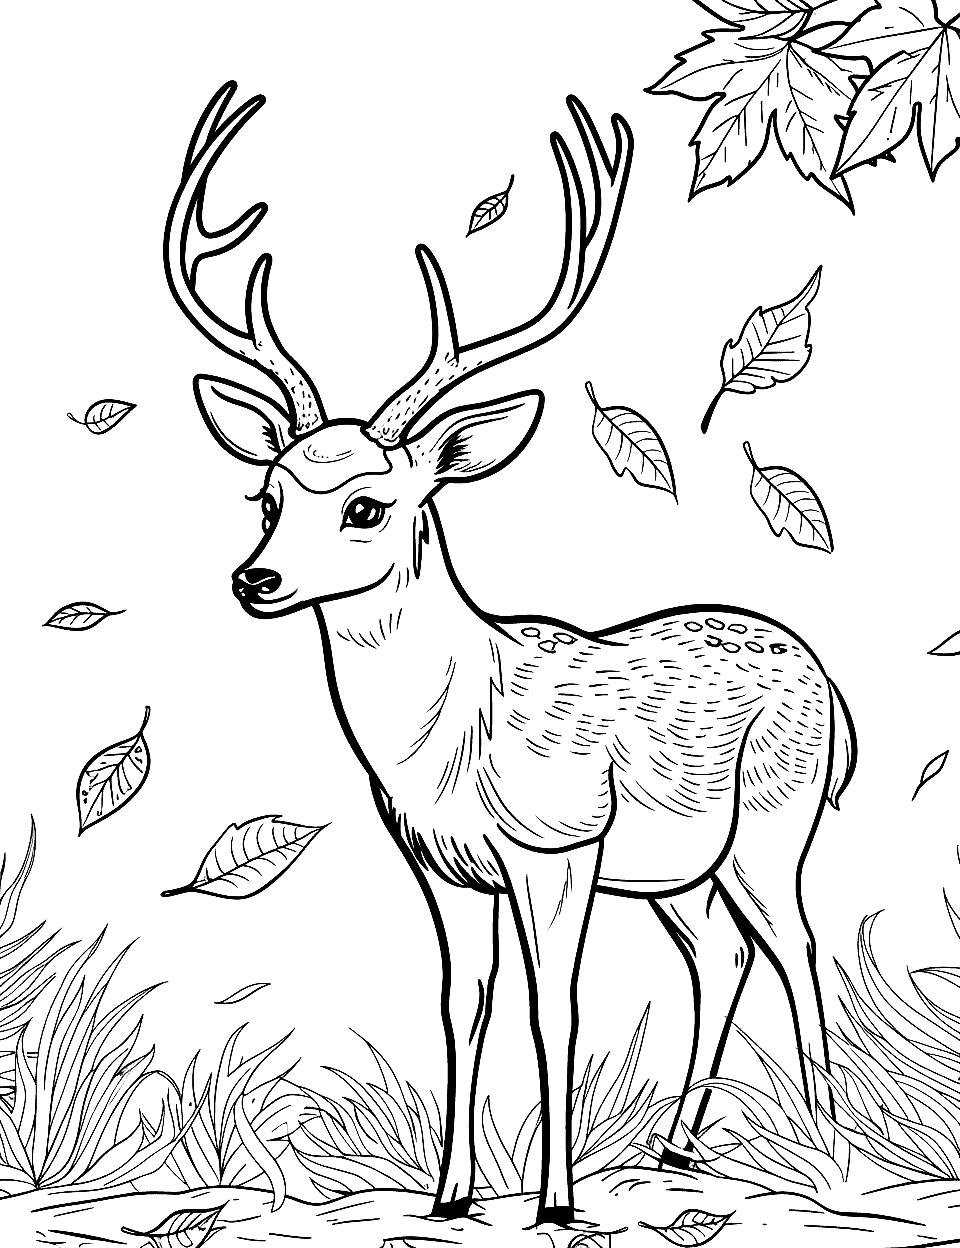 Deer with Falling Leaves Coloring Page - A deer with a backdrop of autumn leaves gently falling.